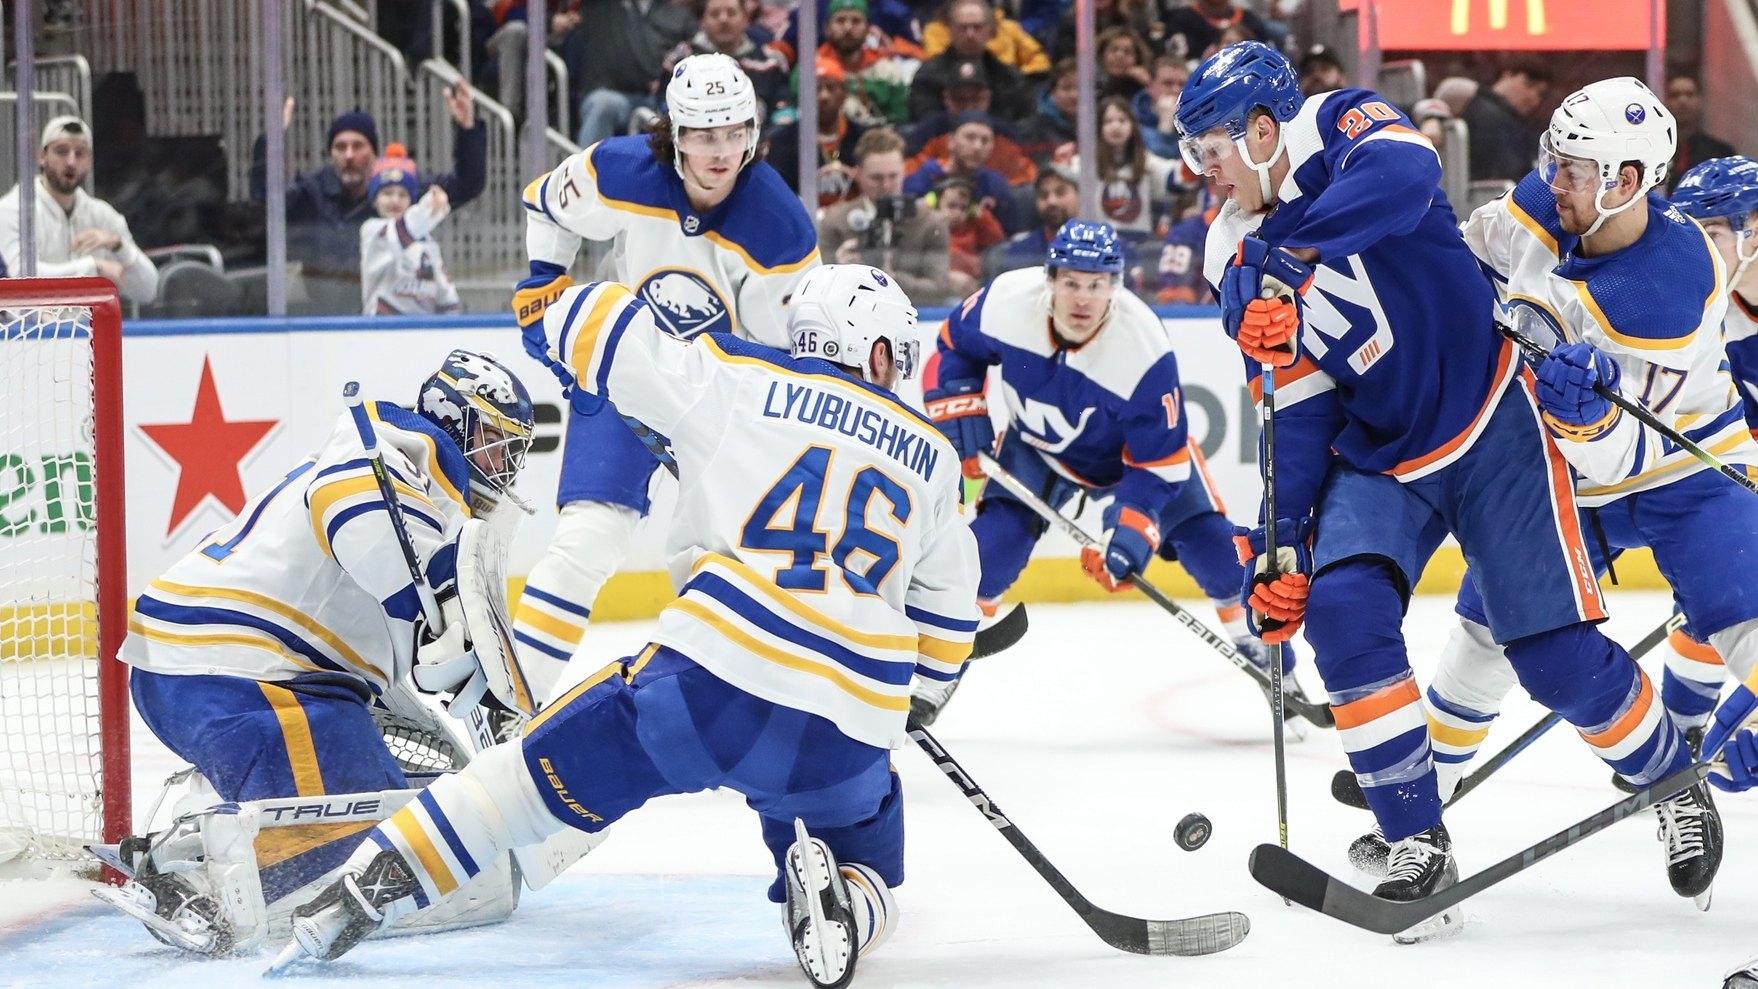 New York Islanders right wing Hudson Fasching (20) attempts a shot on goal in the second period against the Buffalo Sabres. / Wendell Cruz-USA TODAY Sports